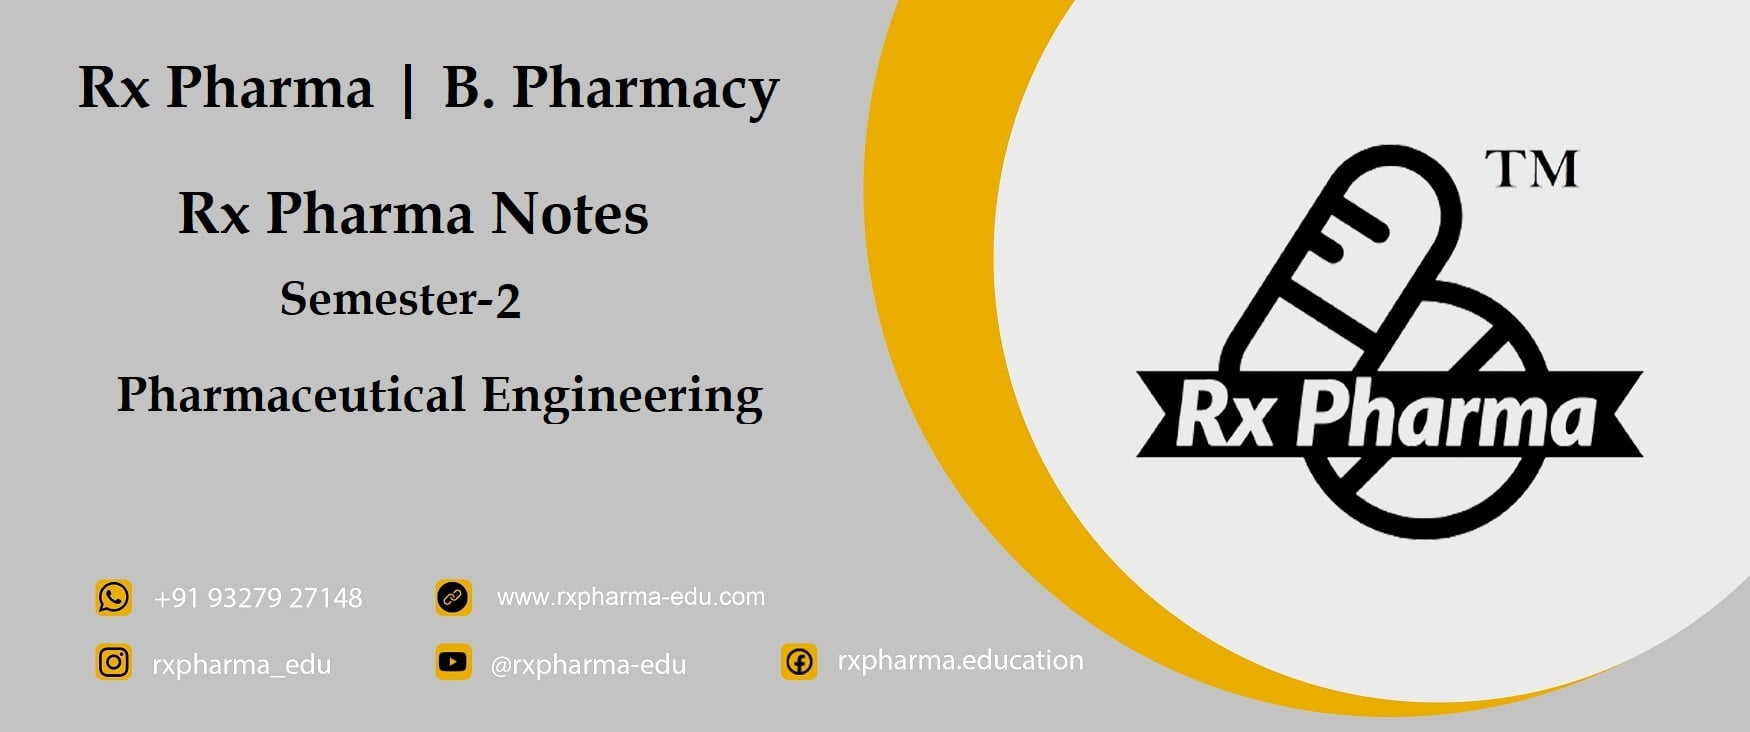 Pharmaceutical Engineering Notes Banner